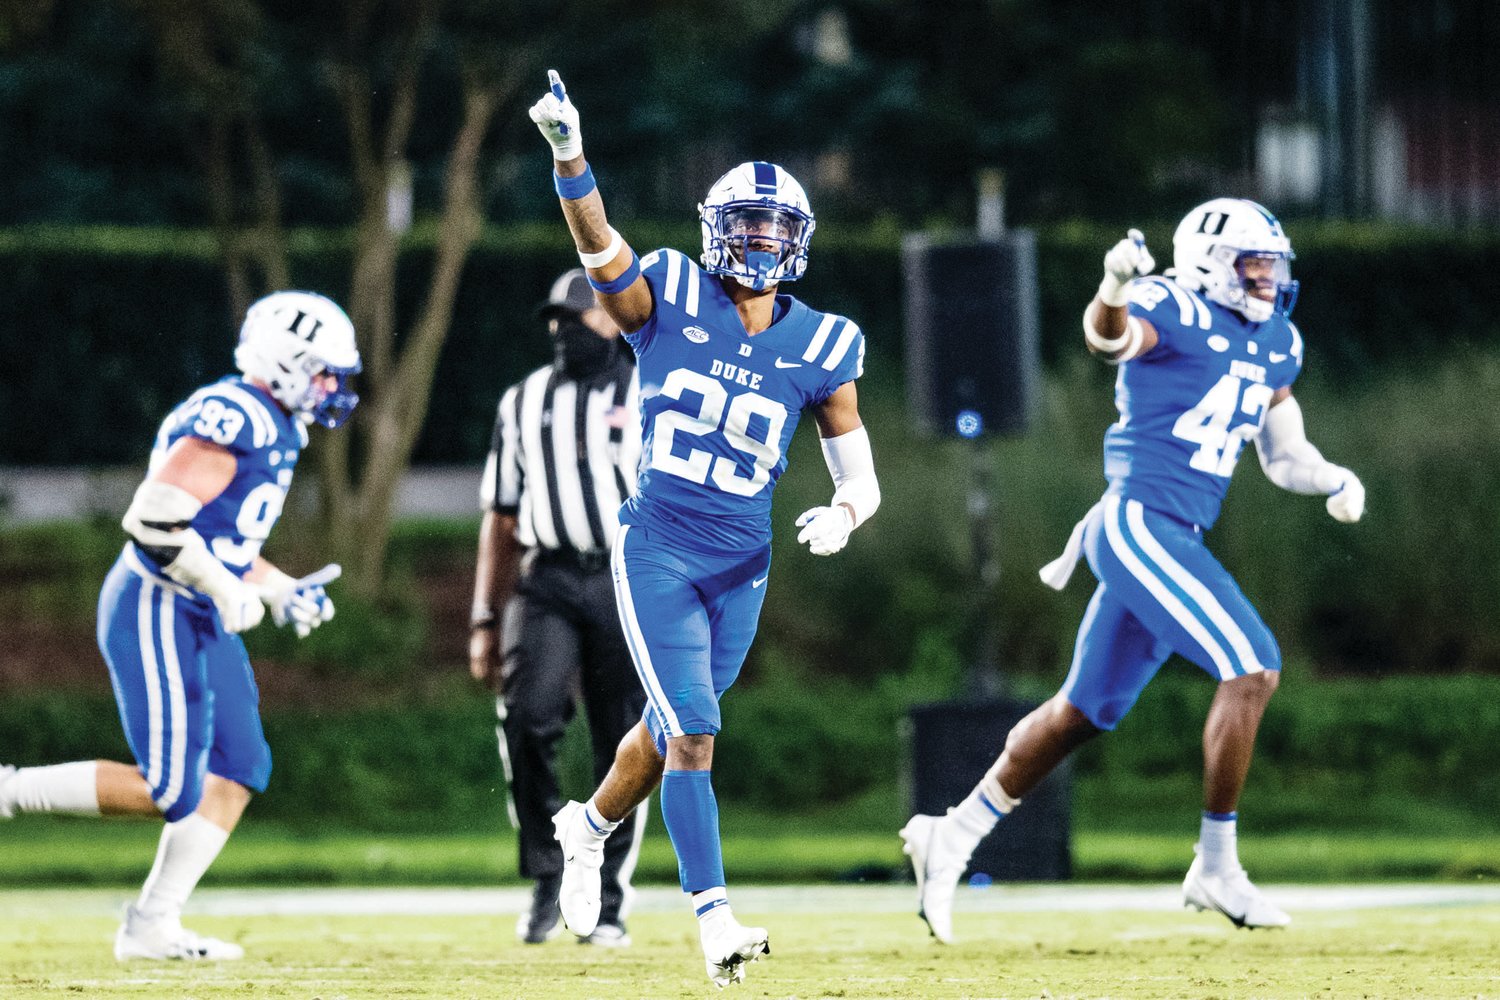 Duke safety Nate Thompson (29) points to the stands as the Blue Devils take on the Virginia Tech Hokies at Wallace Wade Stadium in Durham Oct. 3, 2020.